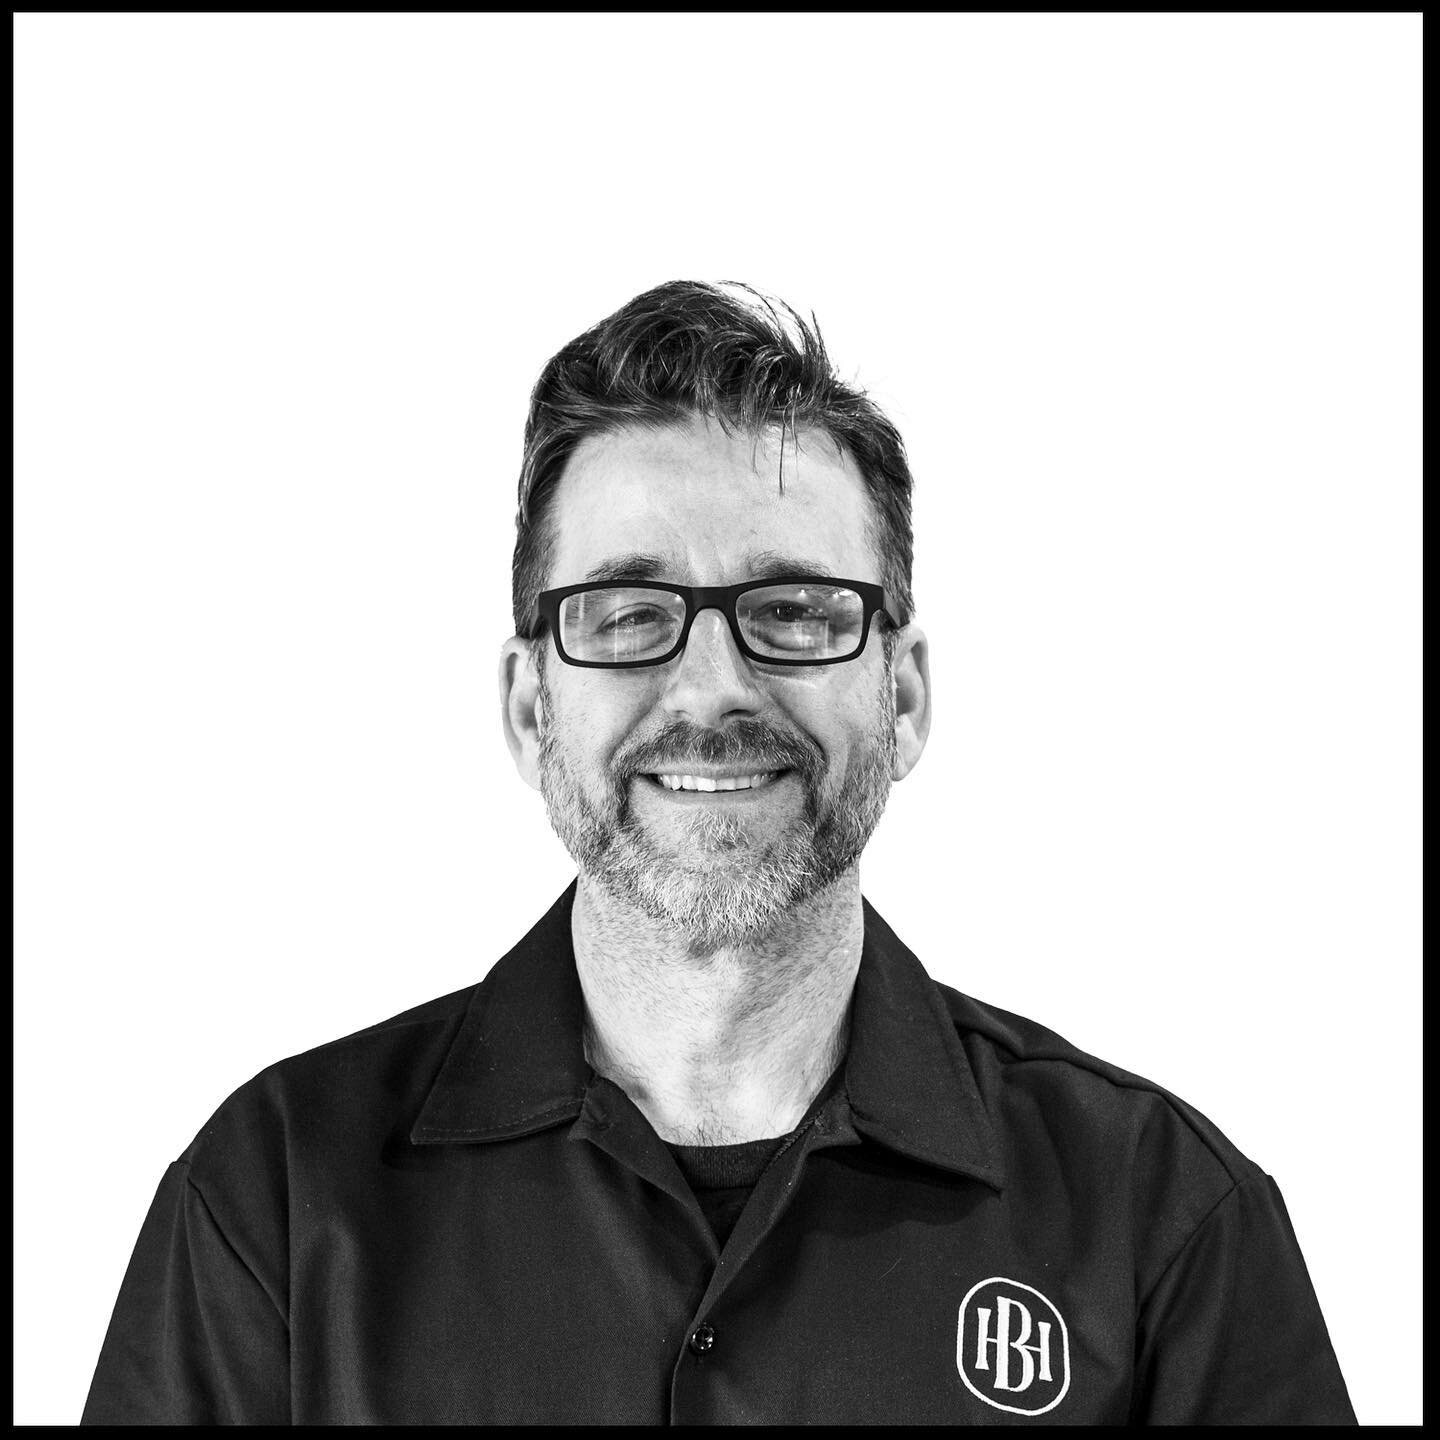 We&rsquo;re so pleased to introduce Tom Sullivan, the newest member of our Bicycle House team.

While Tom has spent the last two decades in the Austin building industry, he&rsquo;s always maintained a love of cycling. A seasoned rider&mdash;and all-a